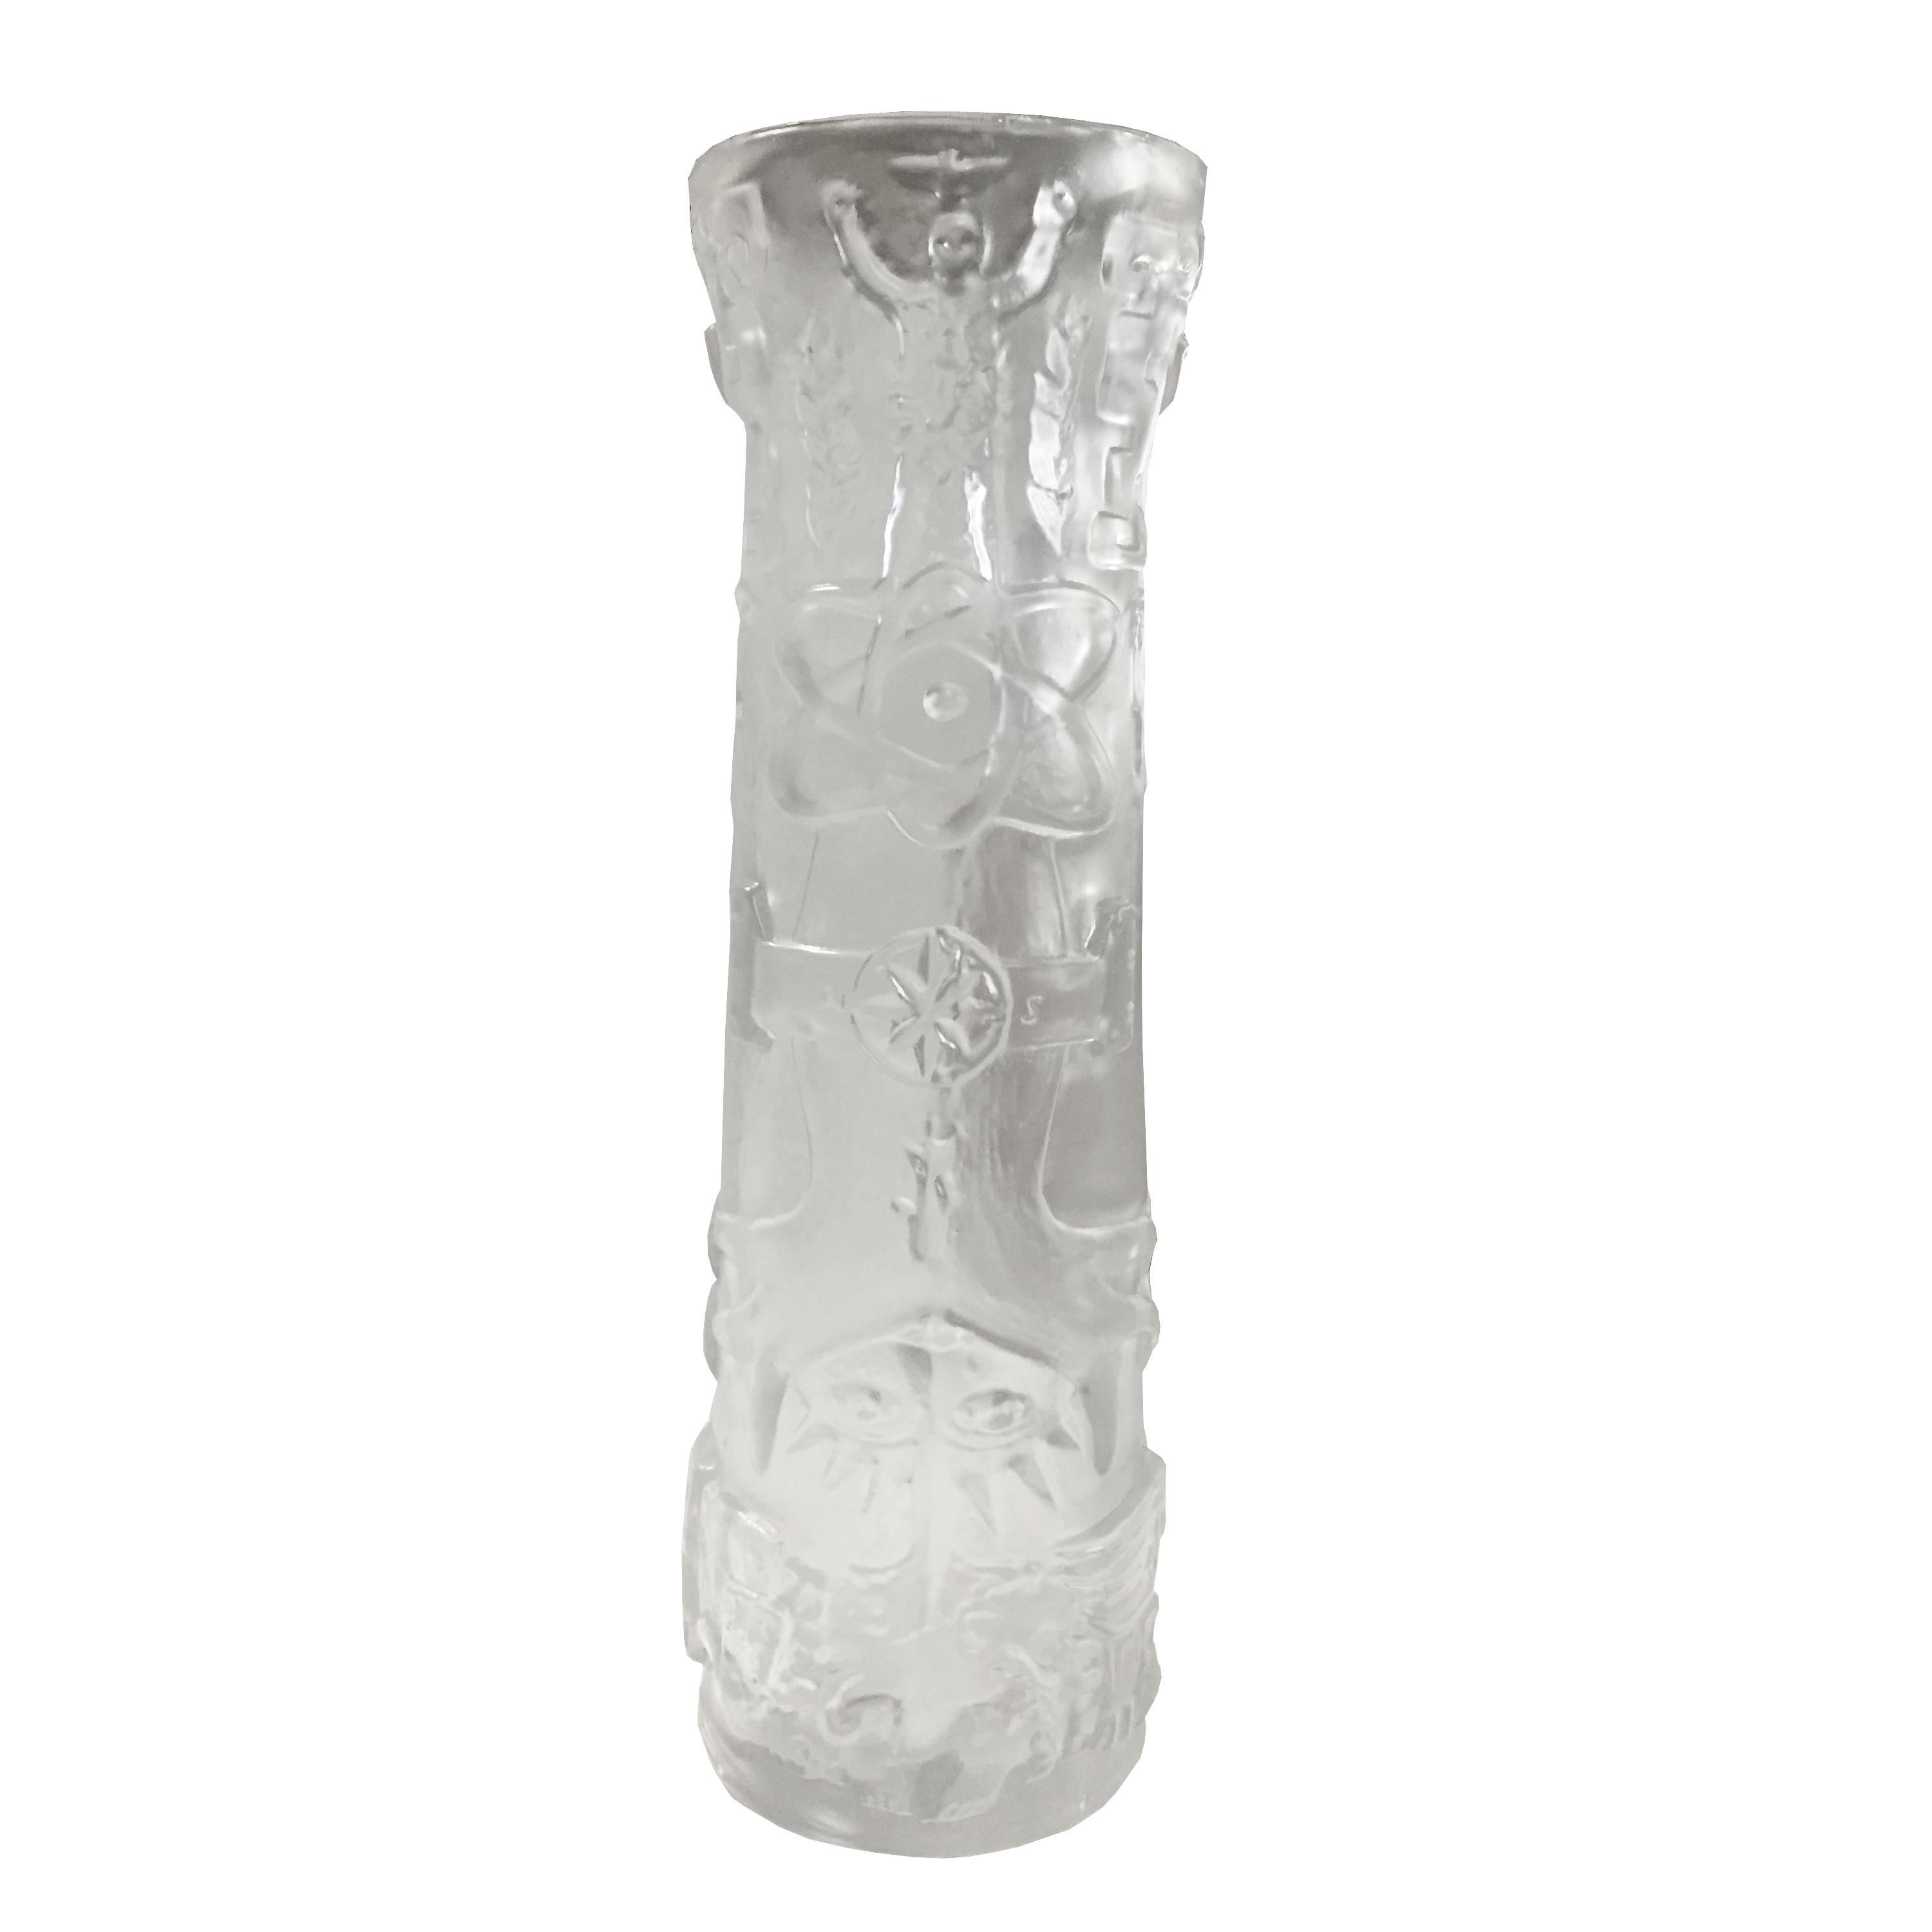 Column of the Mexican Museum of Anthropology. Riedel Glass Flower Vase